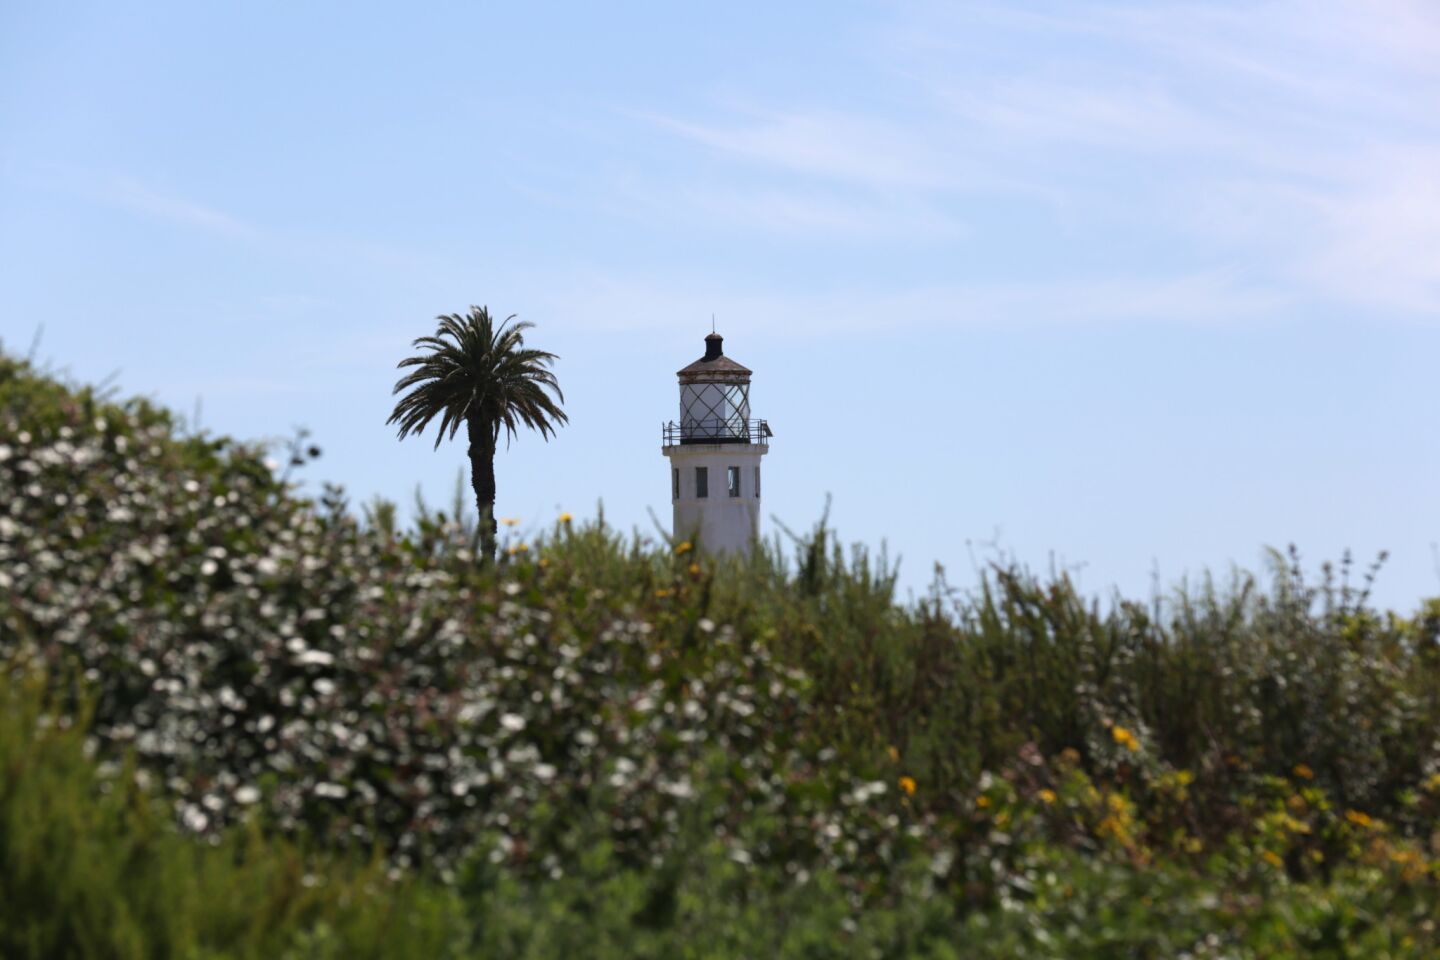 The Point Vicente Lighthouse as seen from Point Vicente Interpretive Center in Rancho Palos Verdes.